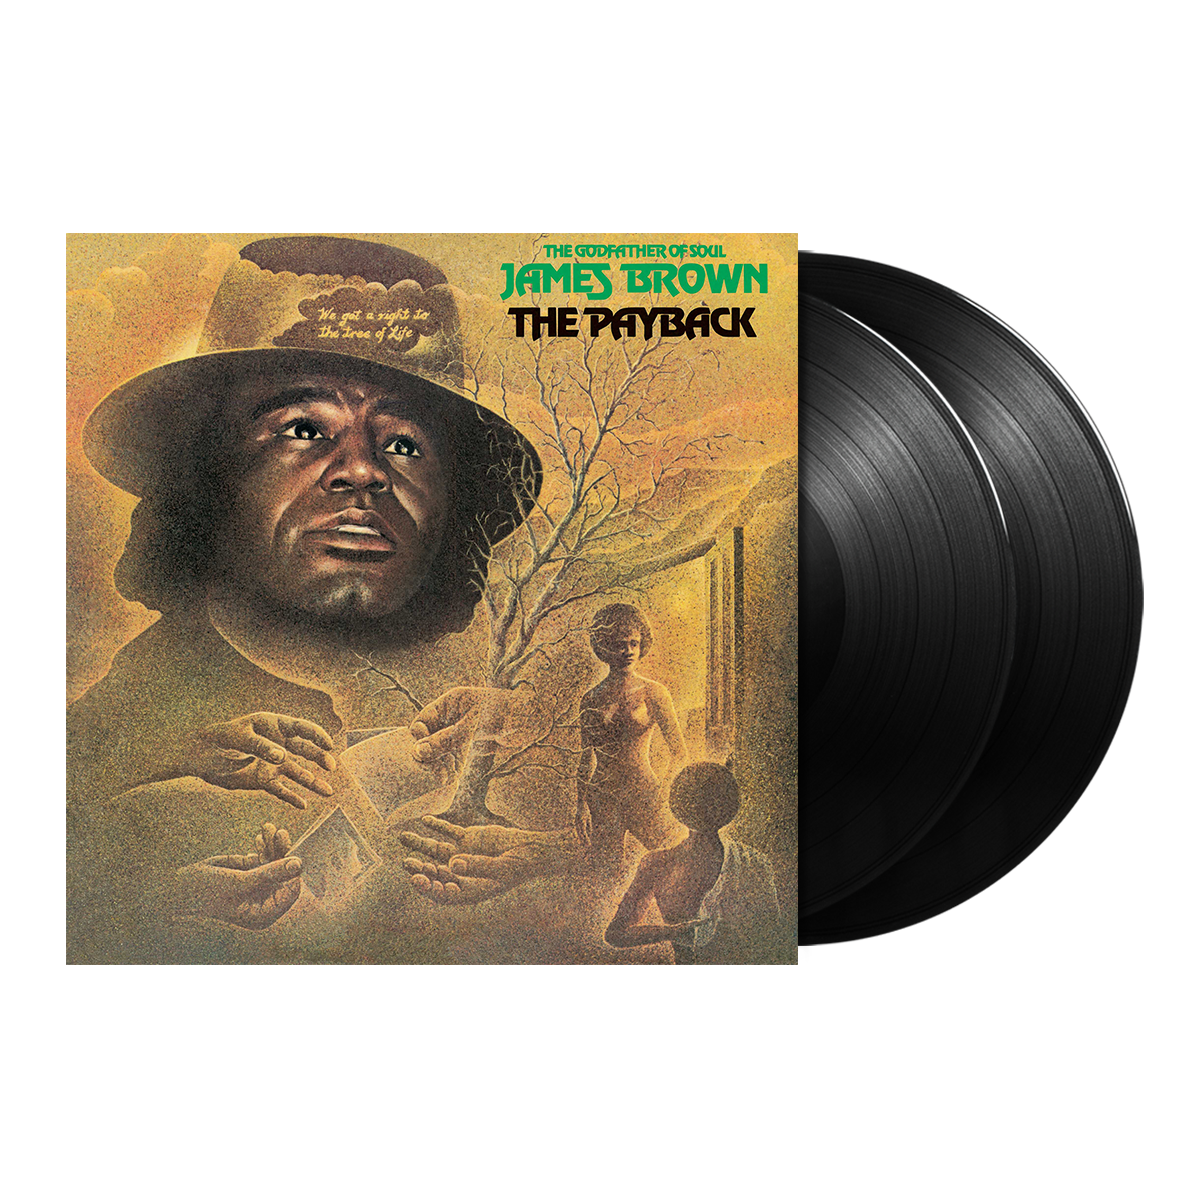 James Brown, The Payback (2LP) - Urban Legends Store